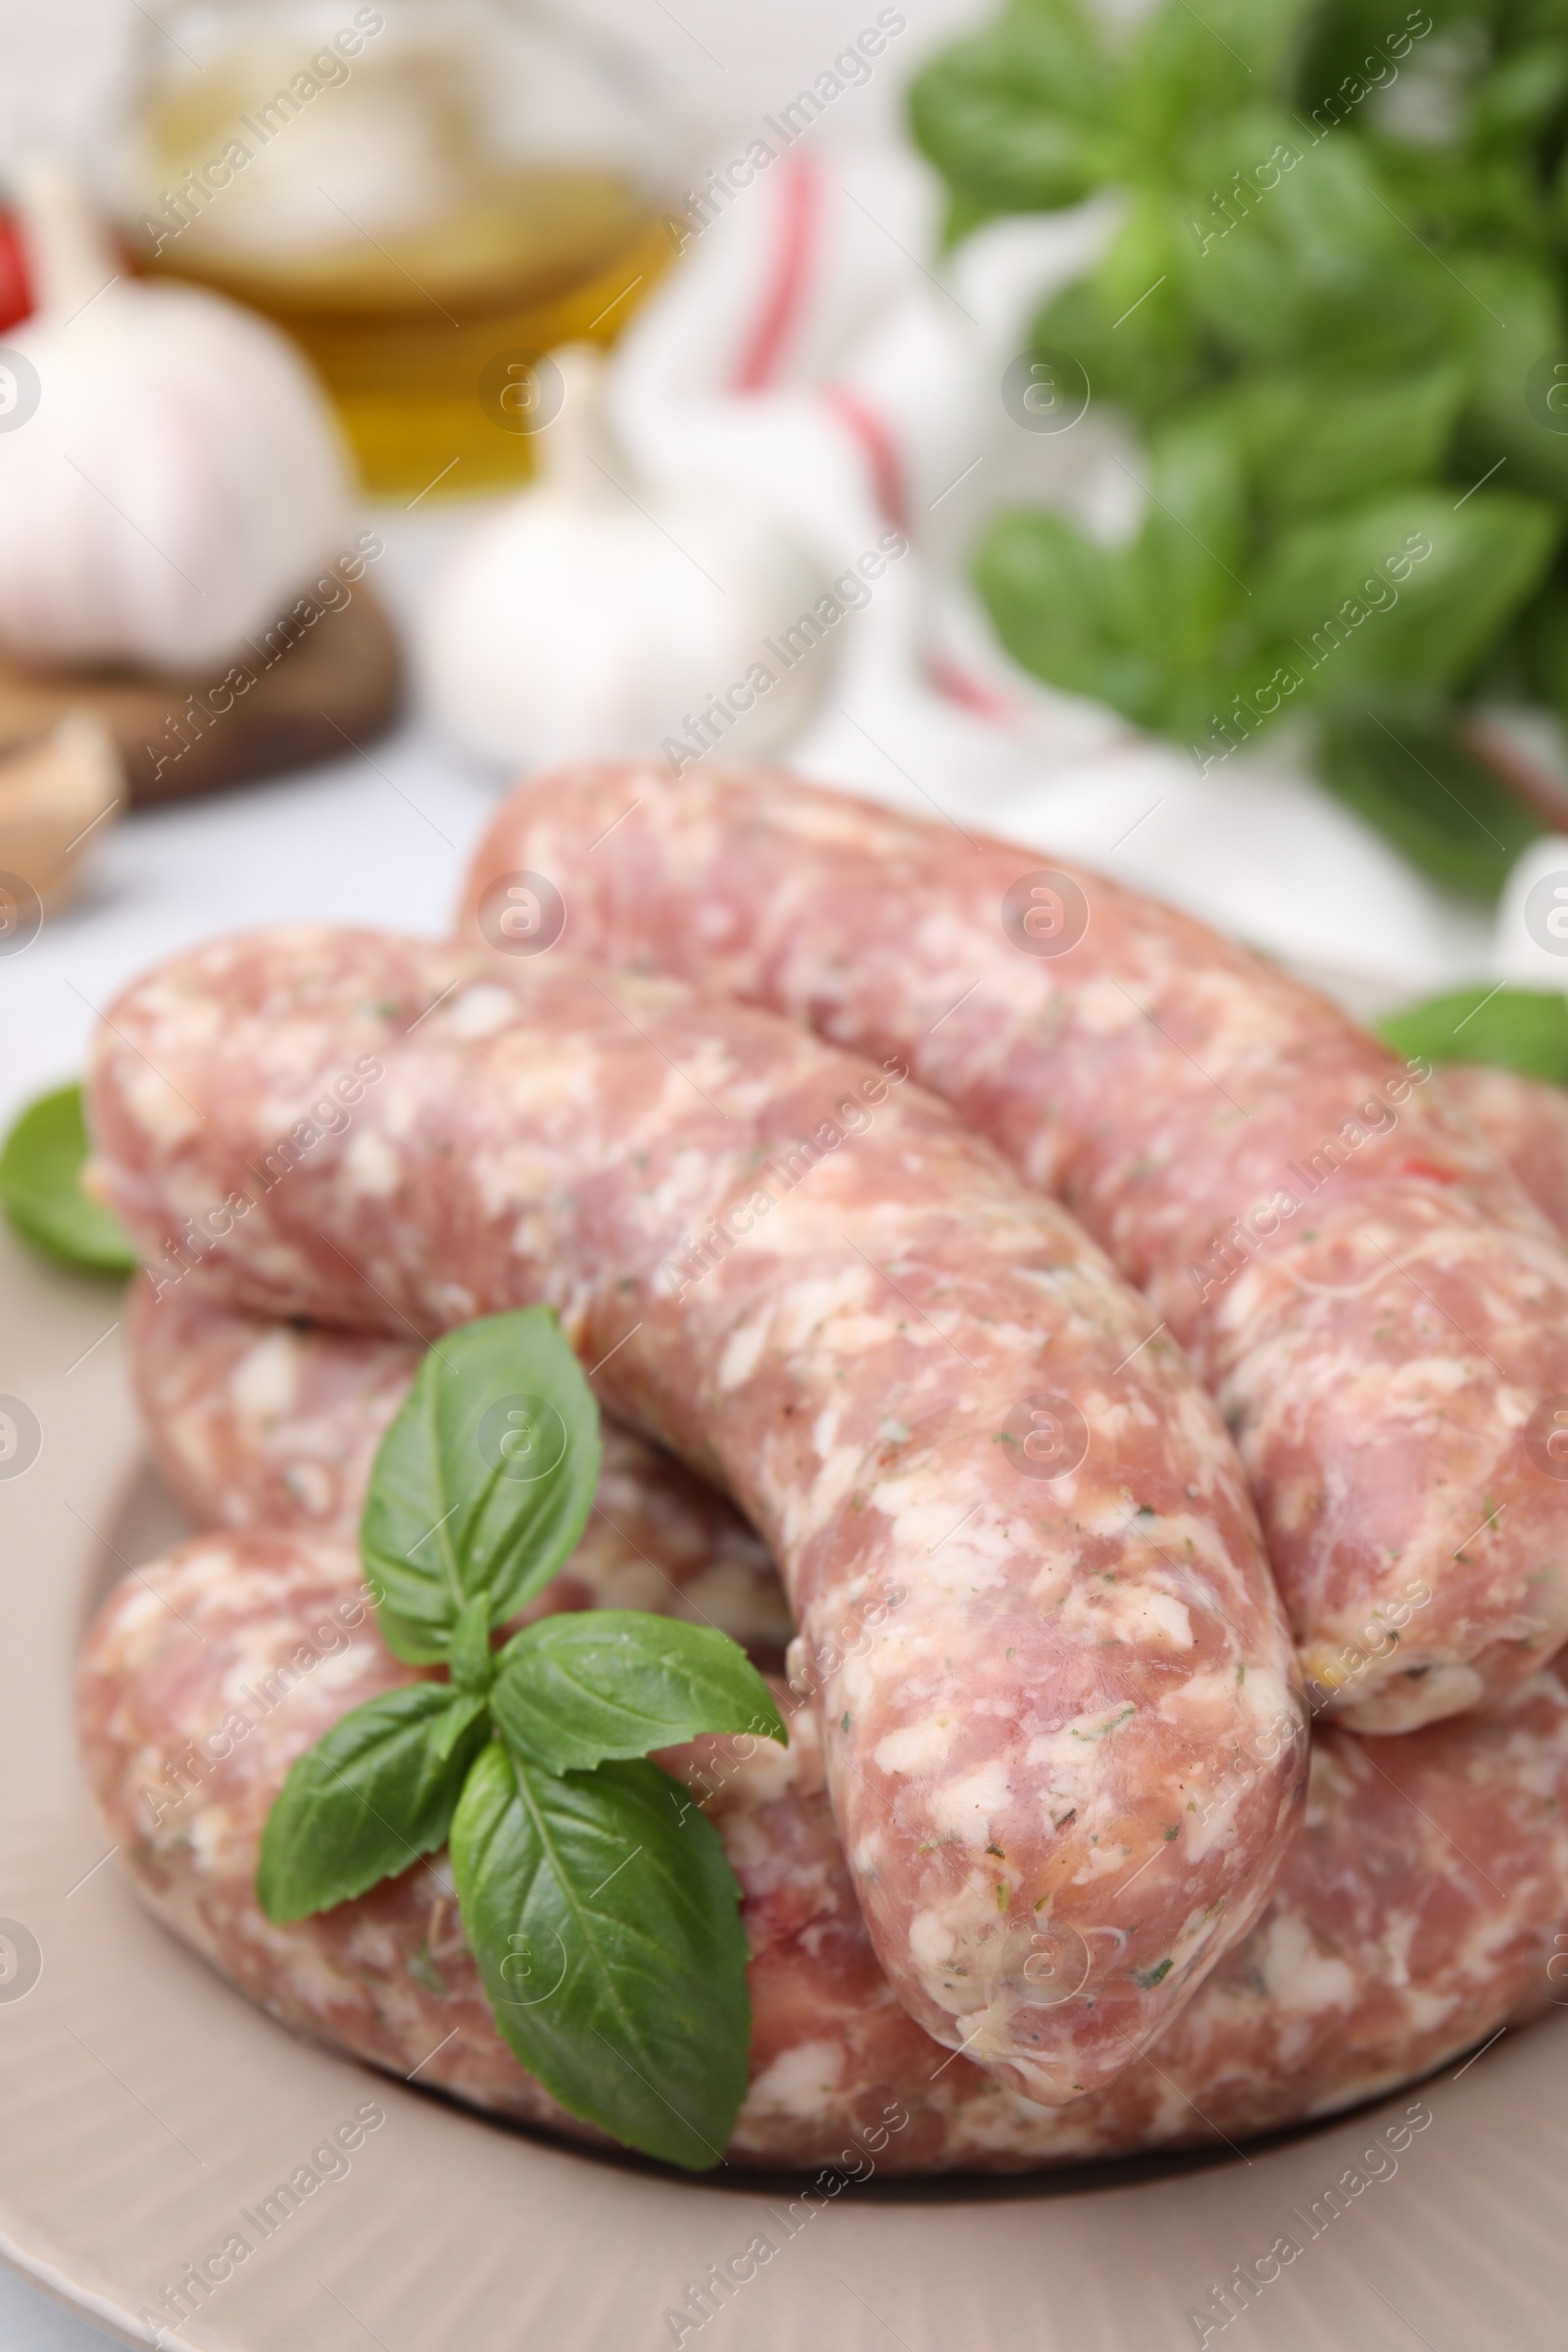 Photo of Raw homemade sausages and basil leaves on plate, closeup